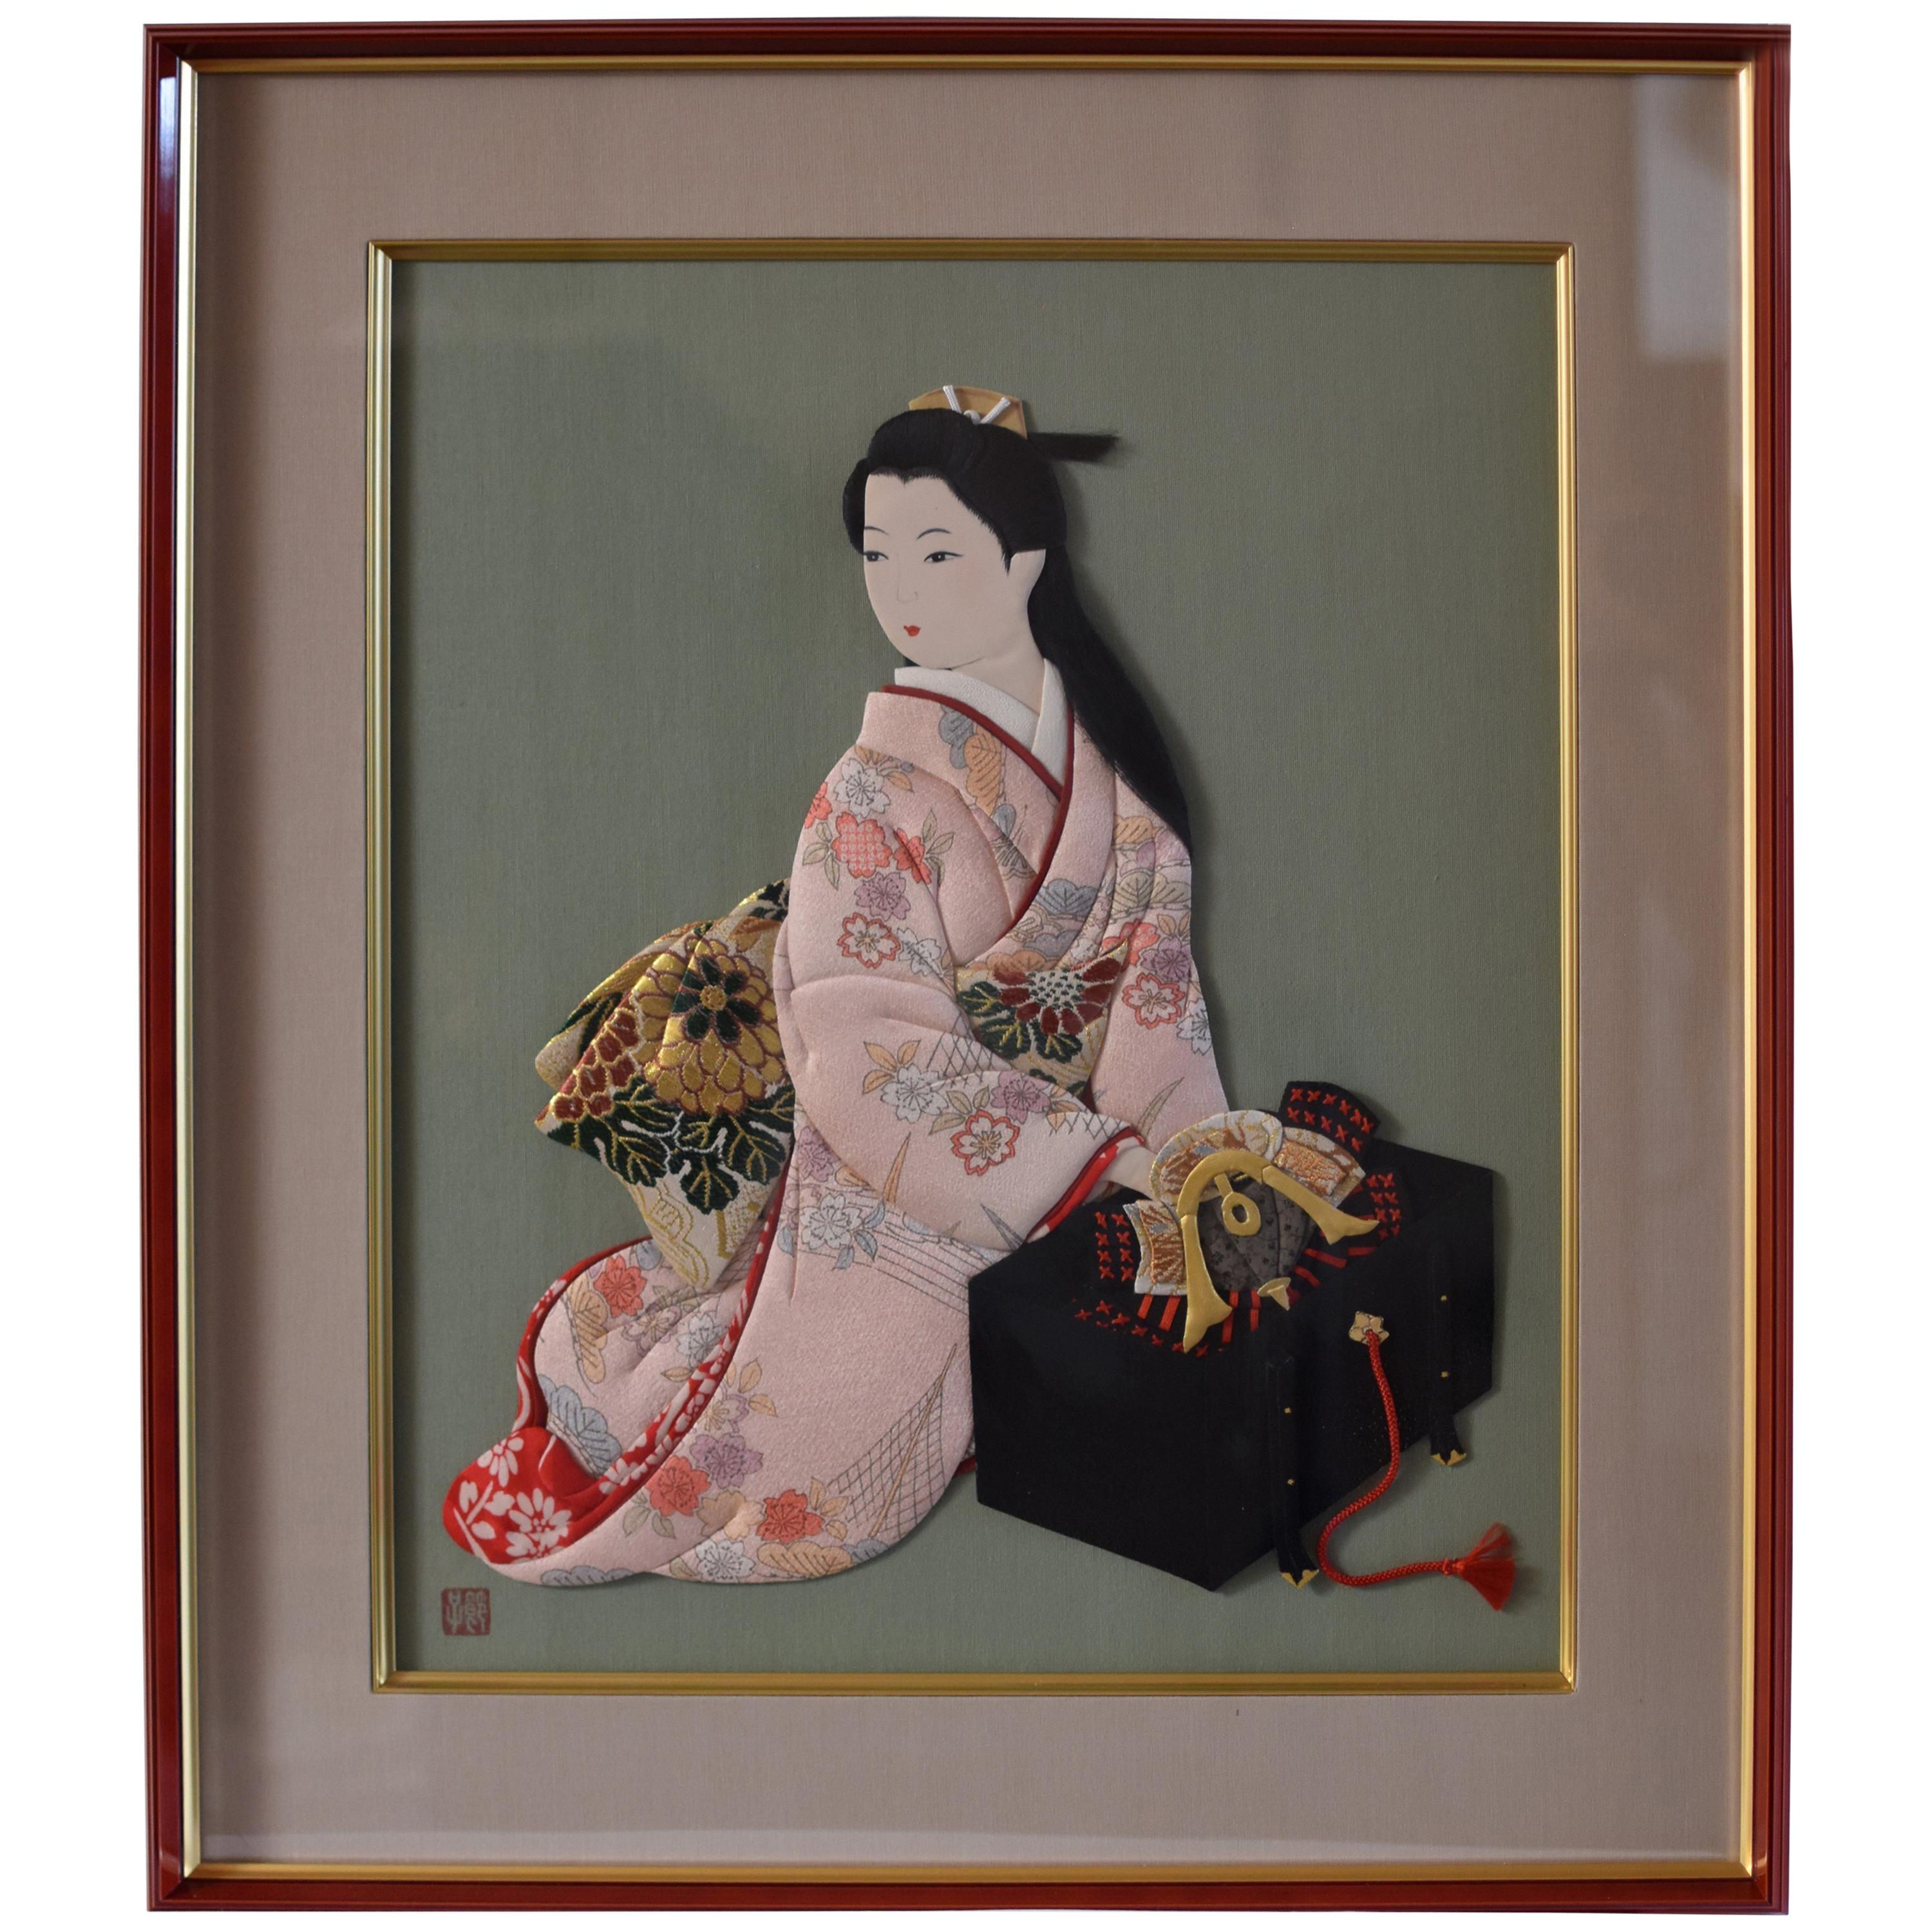 Contemporary Japanese Framed Silk Brocade Handcrafted Oshie Wall Decorative Art For Sale